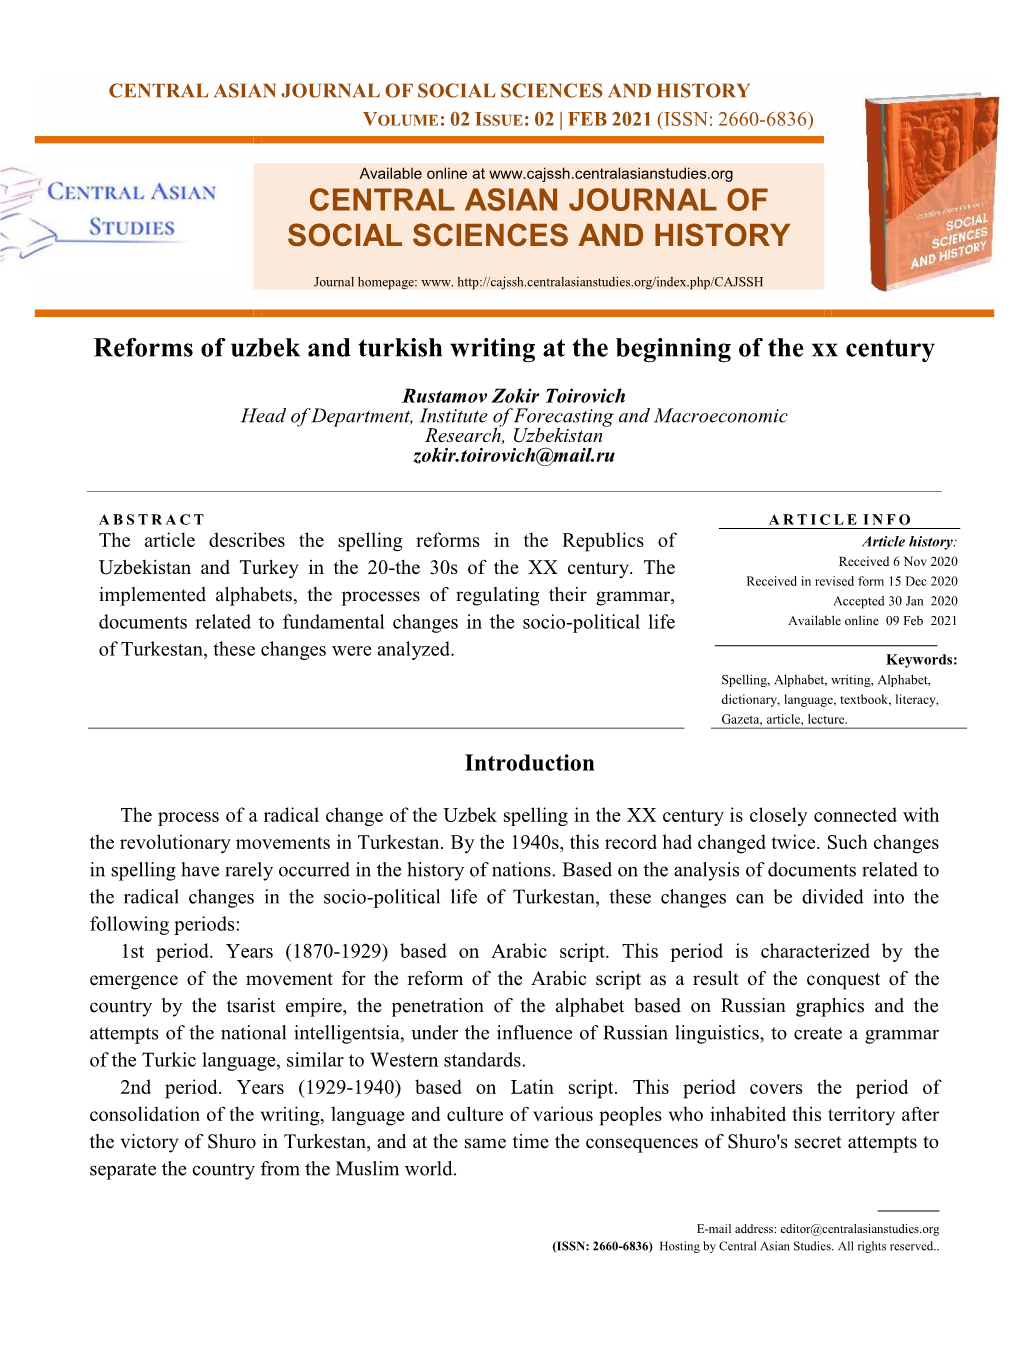 Reforms of Uzbek and Turkish Writing at the Beginning of the Xx Century